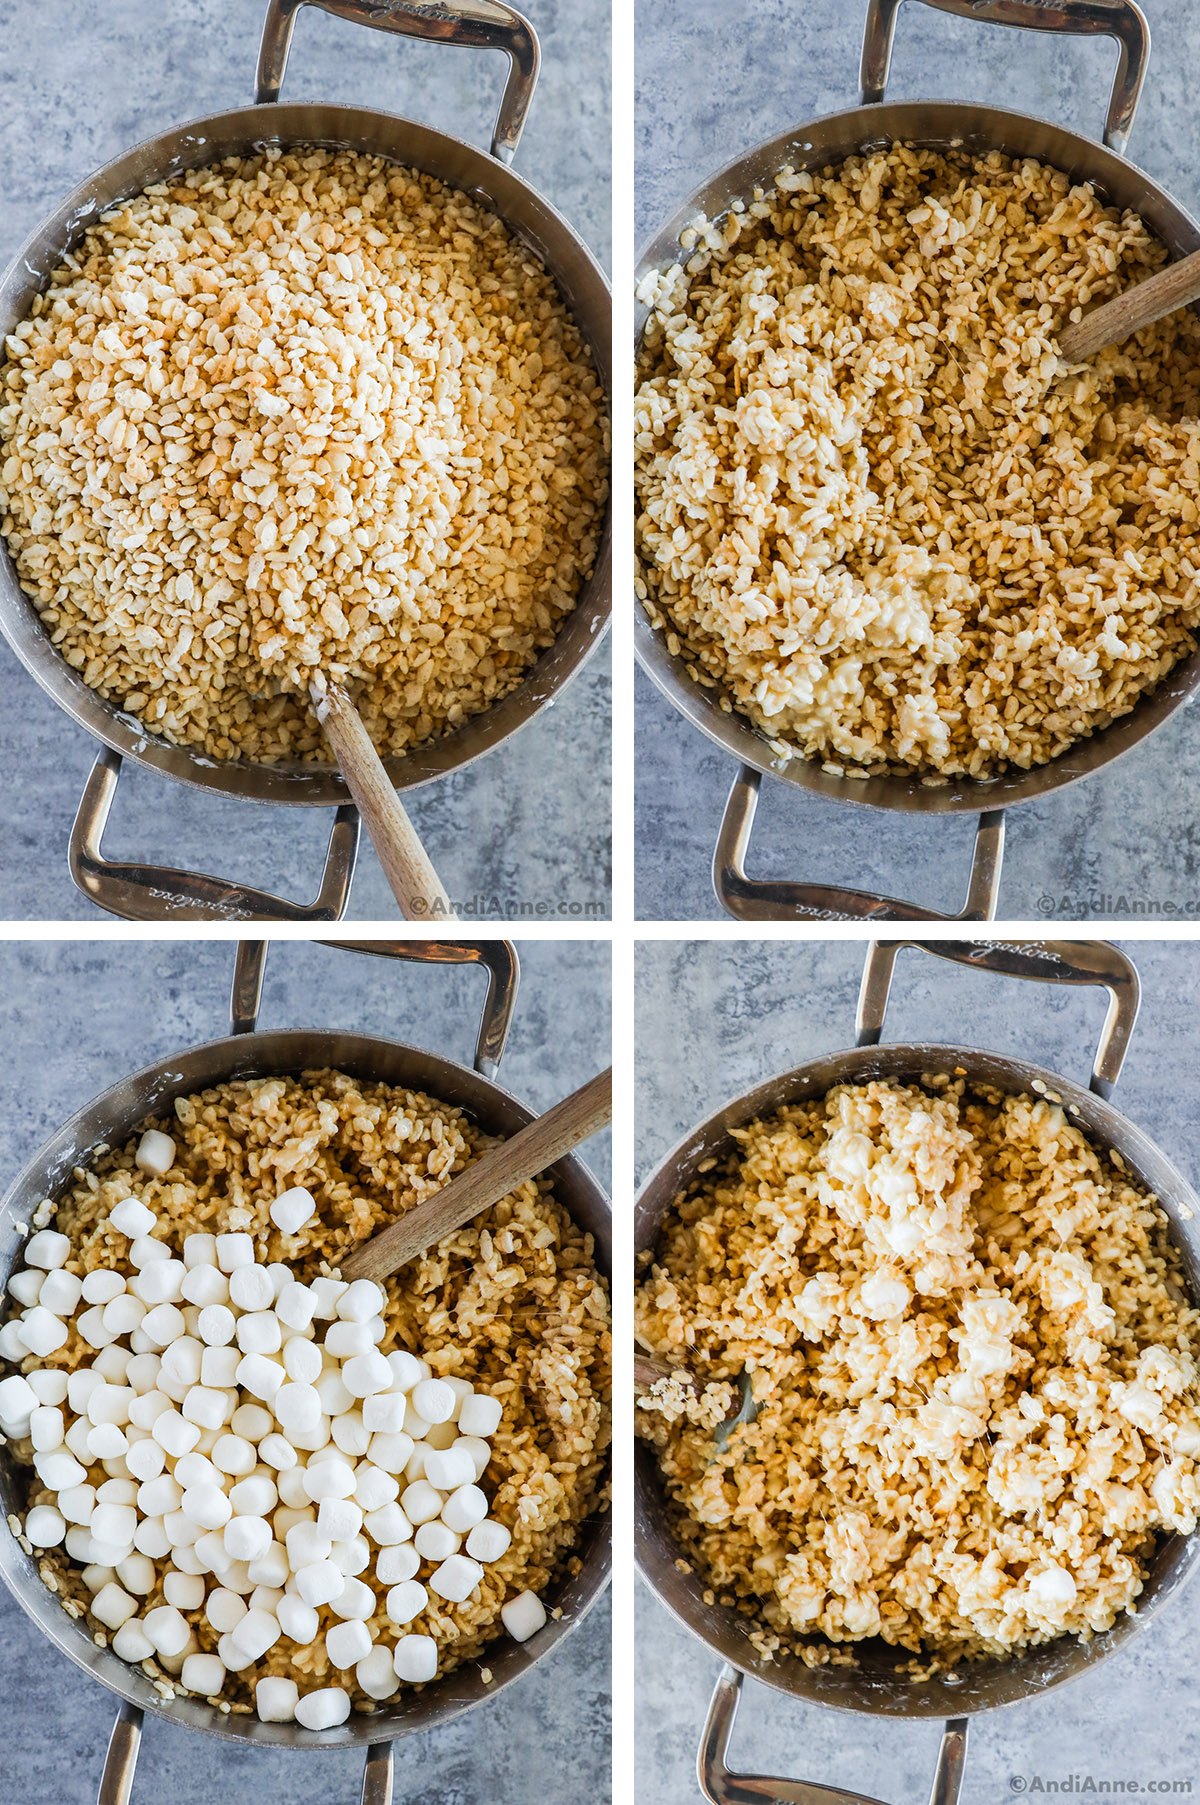 Four images: A pot with rice krispies, a pot with melted marshmallow and rice krispies mixed together, mini marshmallows dumped on top of rice krispies, and last image is rice krispies covered in melted marshmallows with a few mini marshmallows mixed in.